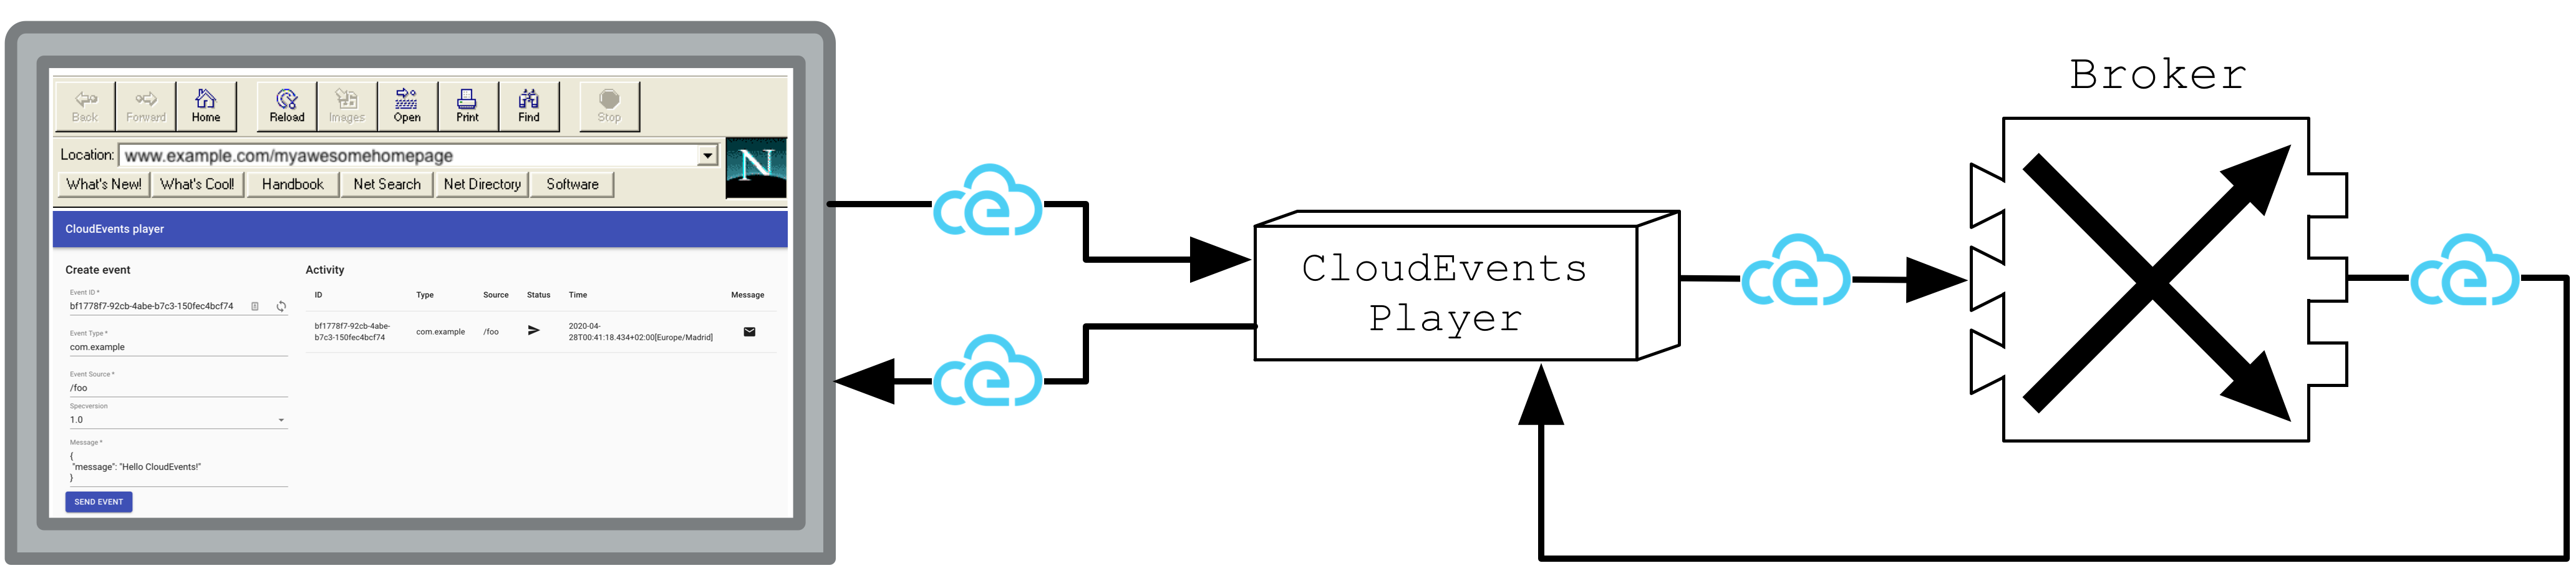 The CloudEvents Player acts as both a source and a sink for CloudEvents